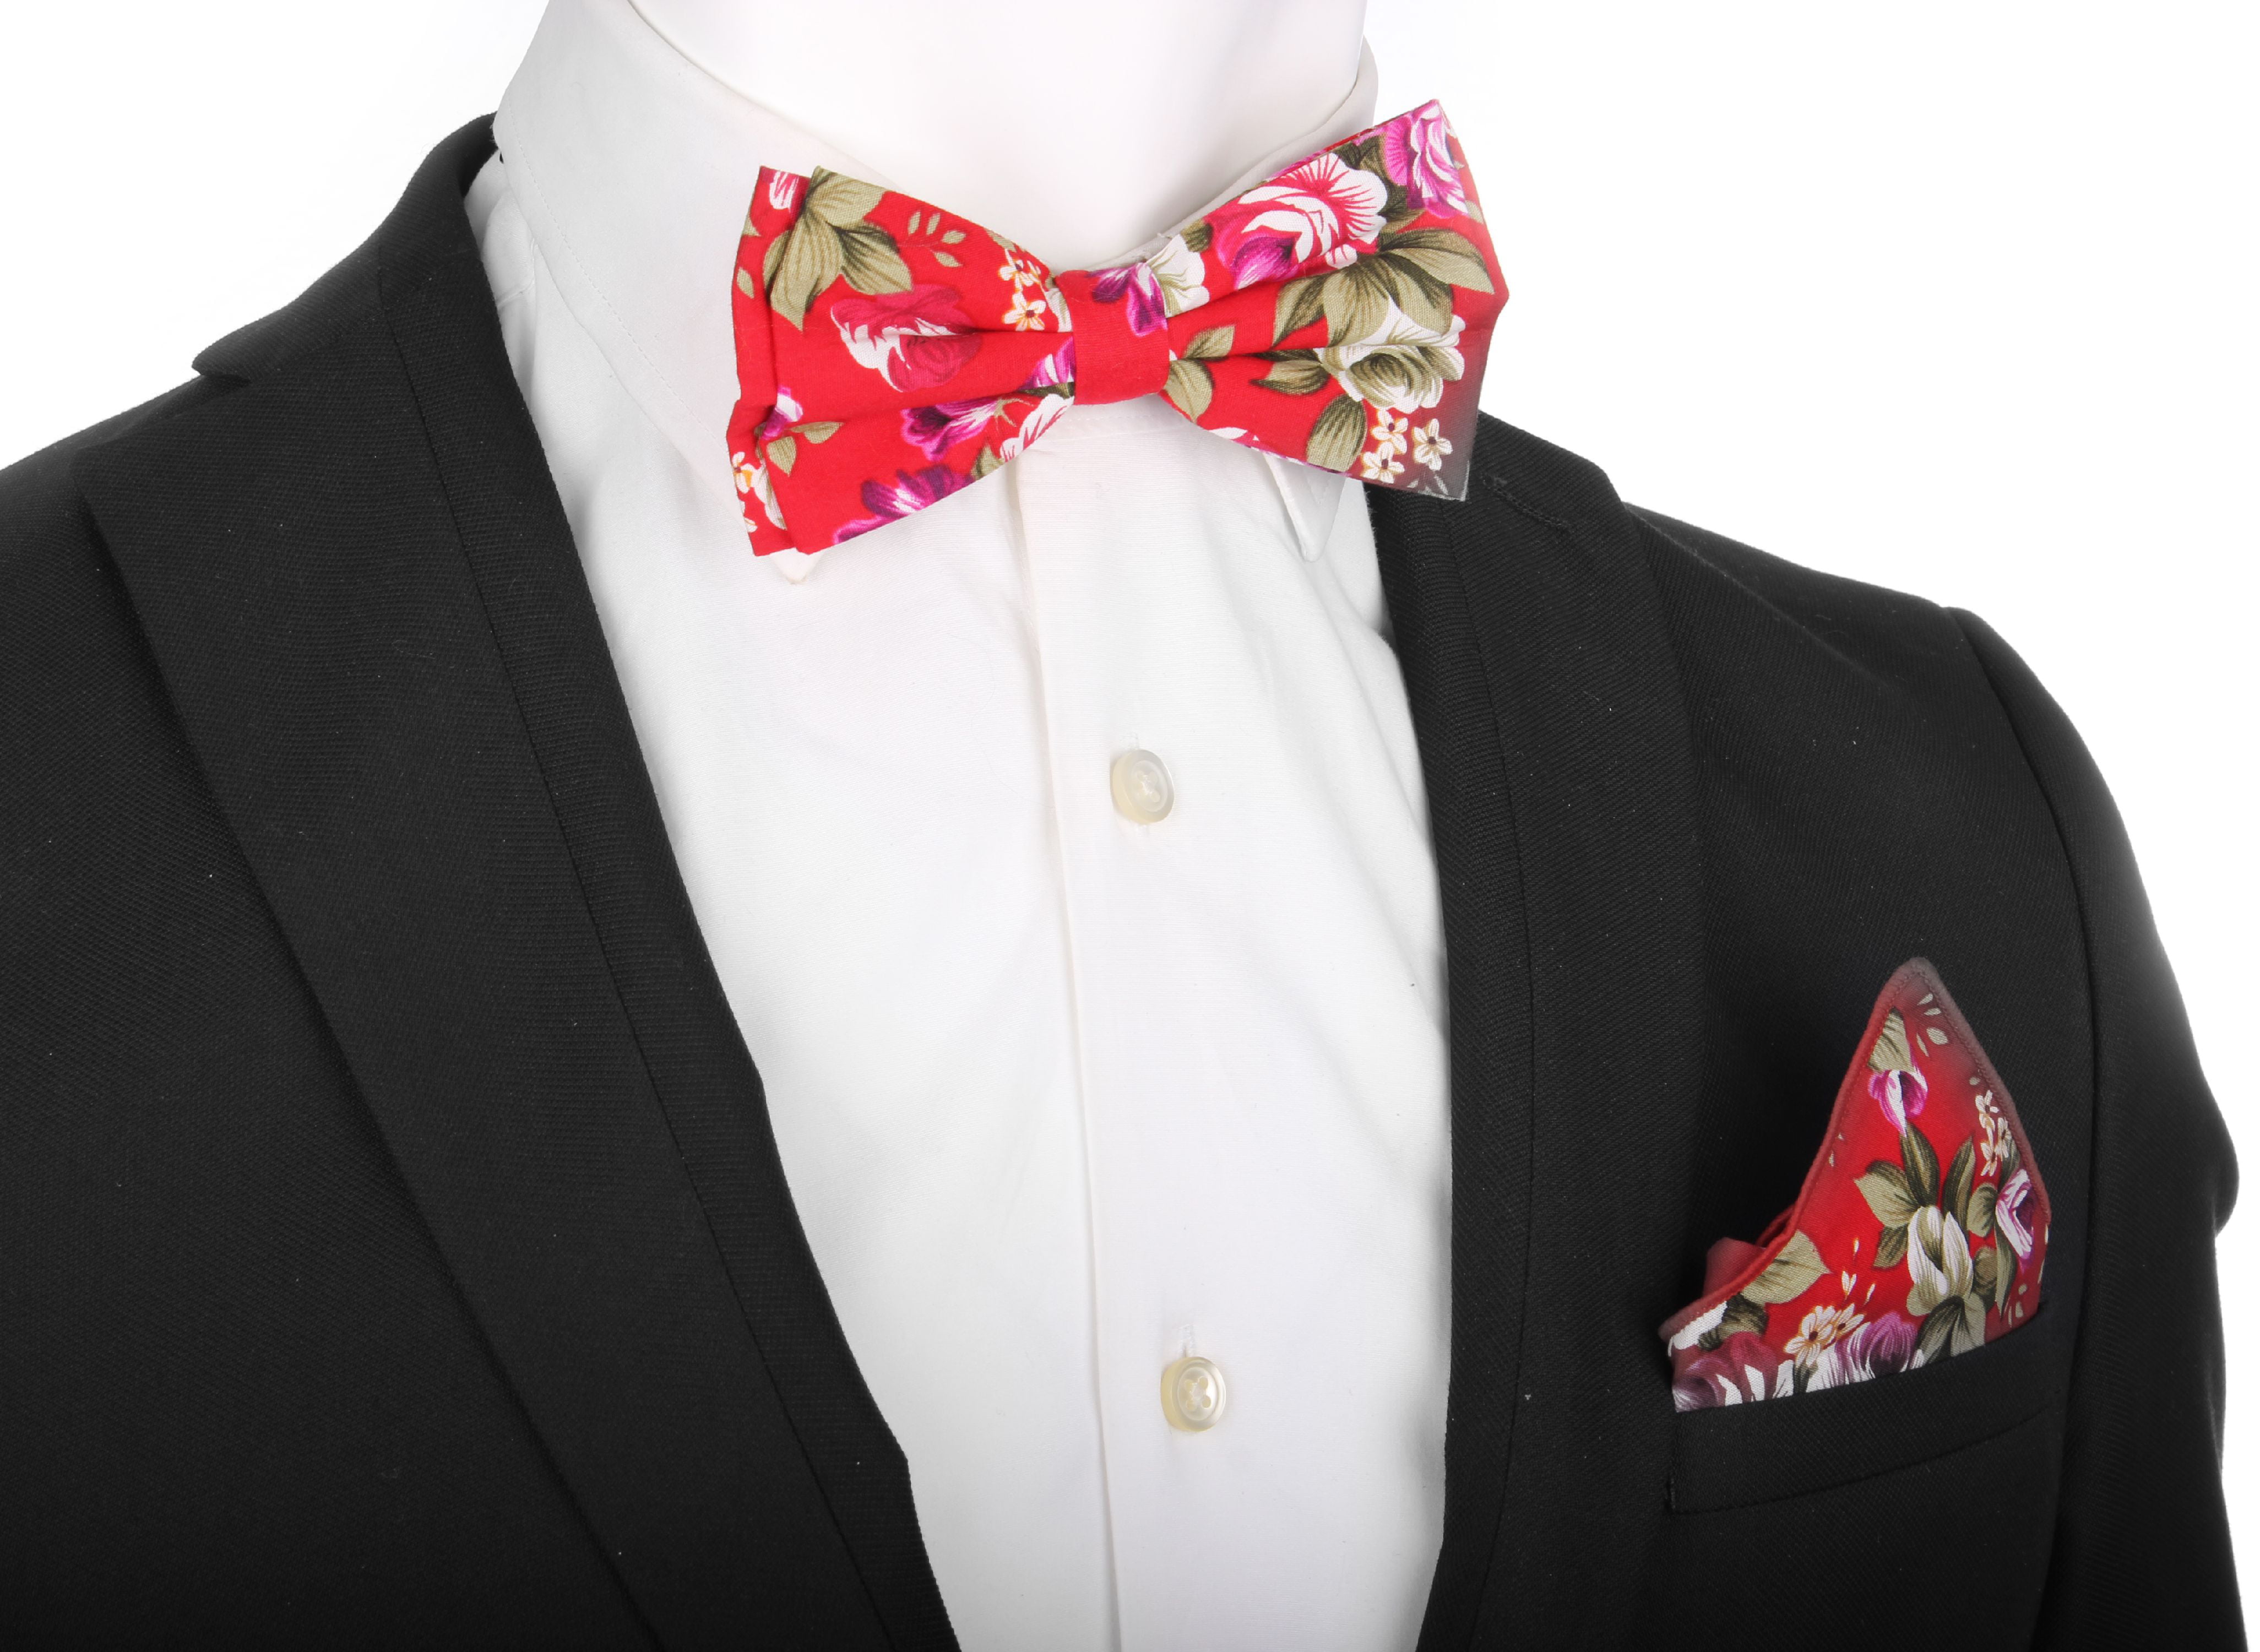 HDE Mens Big and Tall Pre-Tied Adjustable Bow Tie with X-Back Suspenders Bundle Red